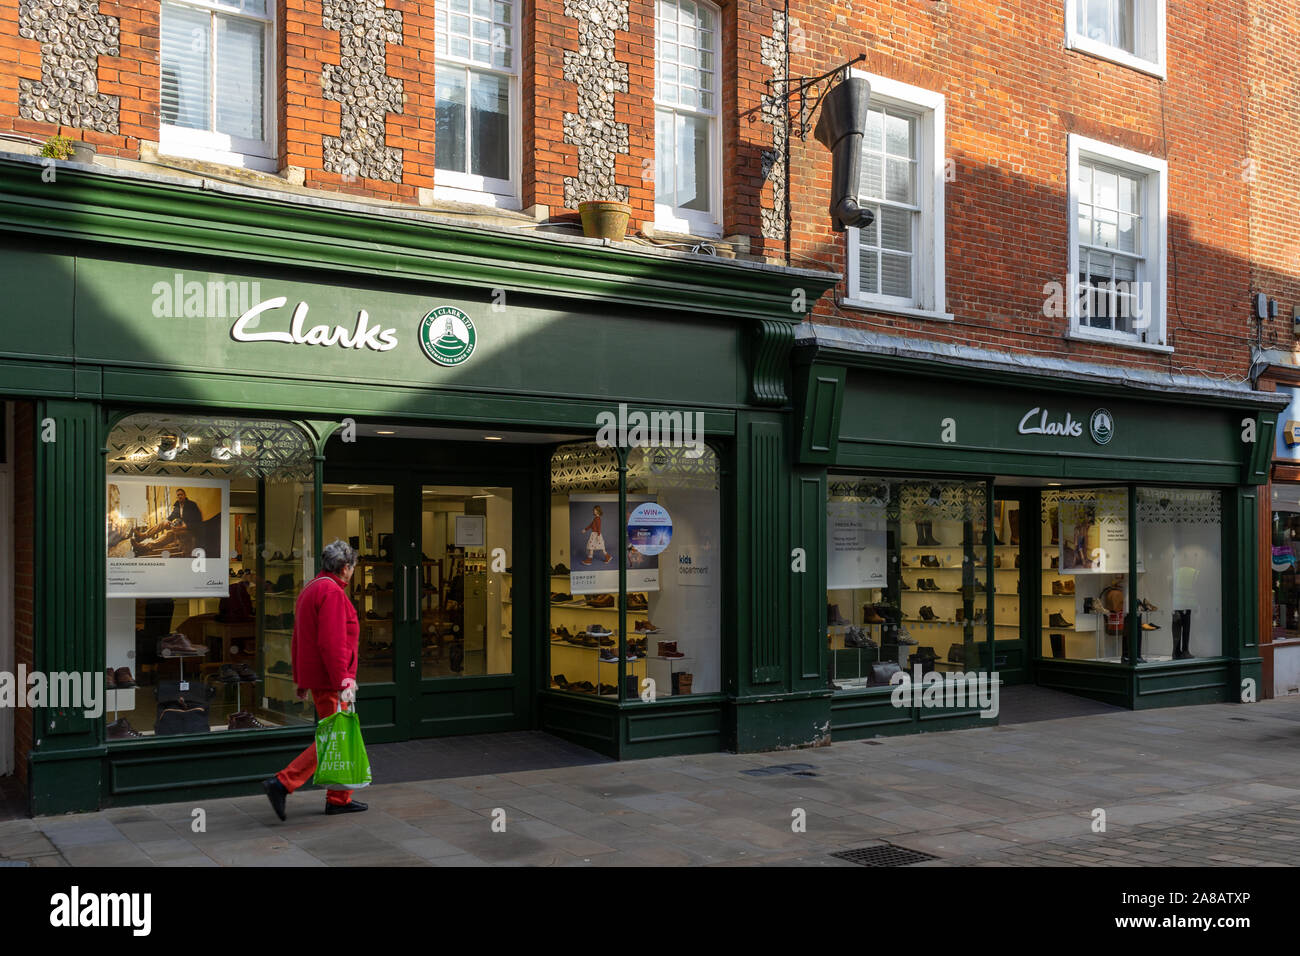 The exterior of a Clarks shoe shop or shoe store on the high street in  Winchester UK Stock Photo - Alamy